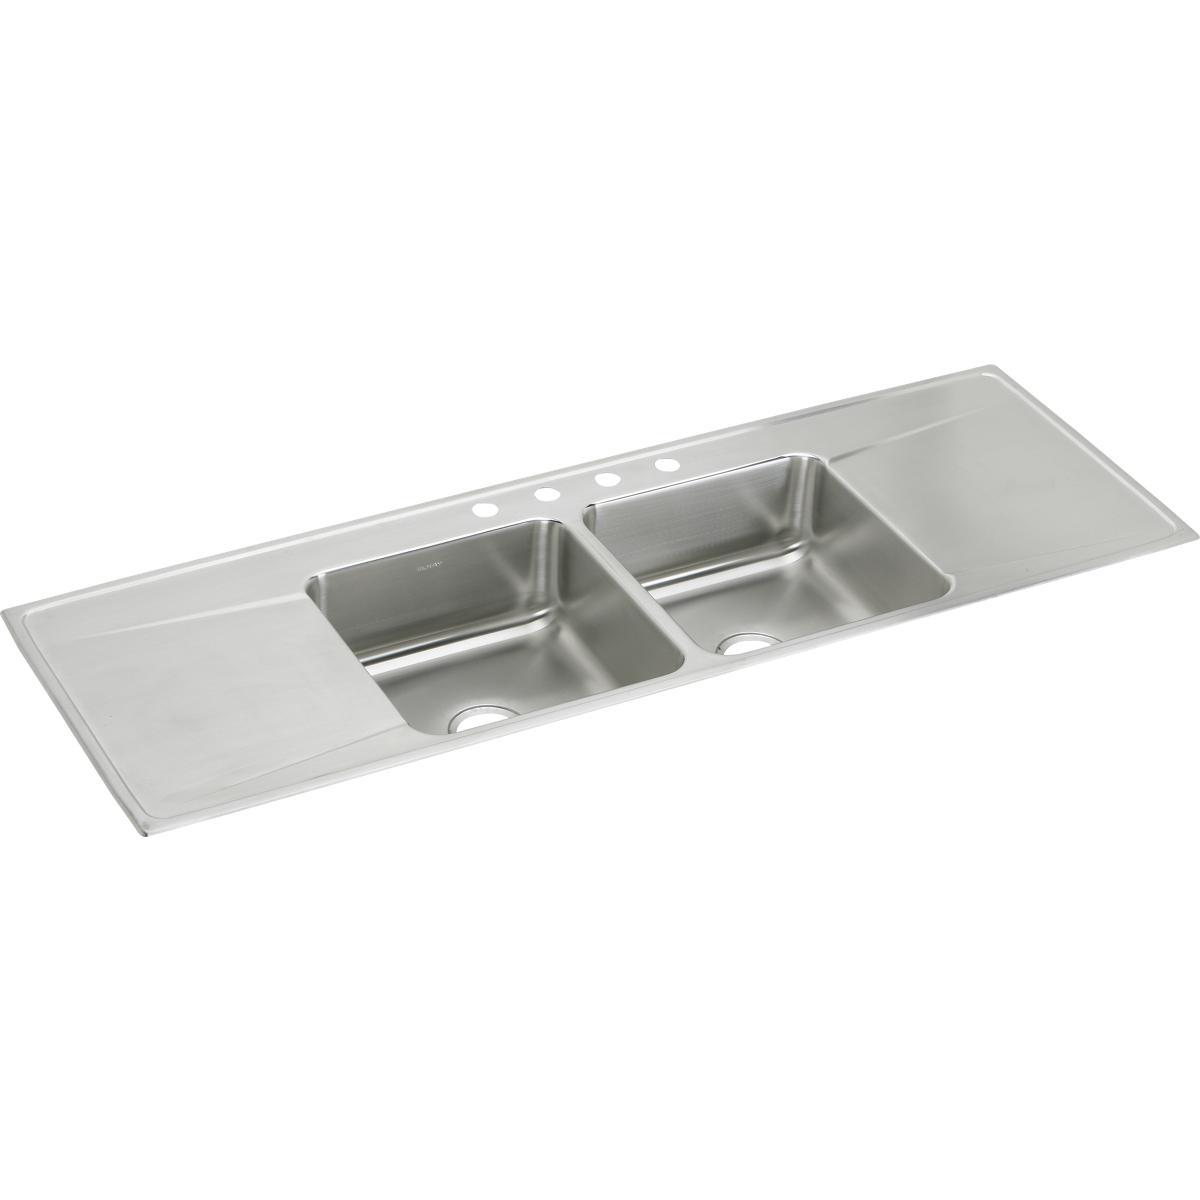 Elkay Lustertone Classic 66" x 22" x 7-5/8" Equal Double Bowl Stainless Steel Drop-in Sink with Drainboard